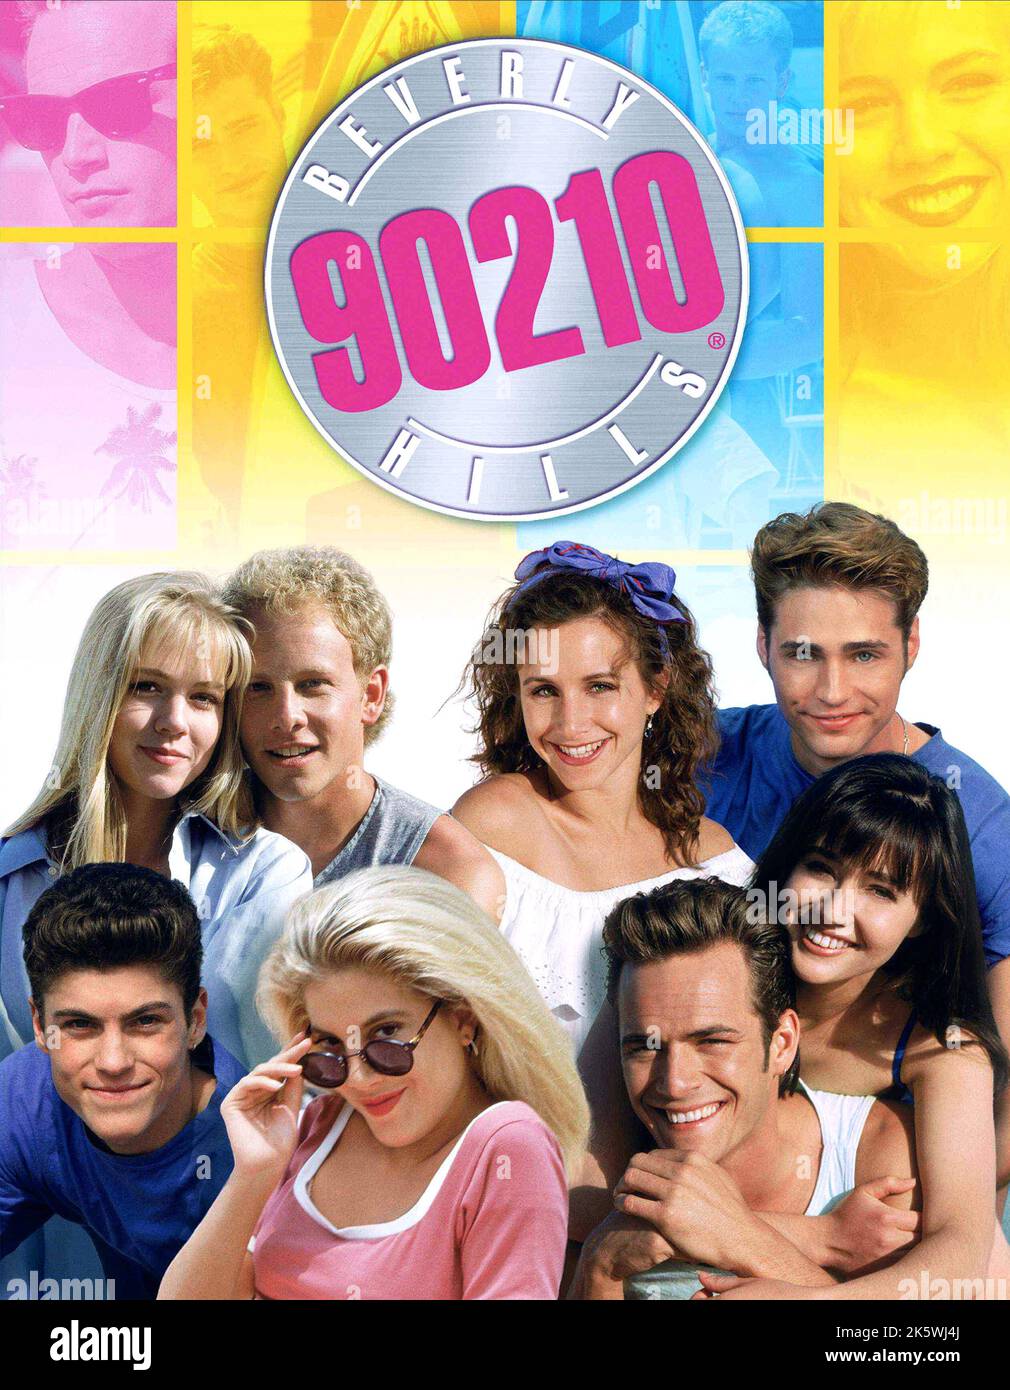 Beverly Hills 90210 TV Show Poster Stockfoto